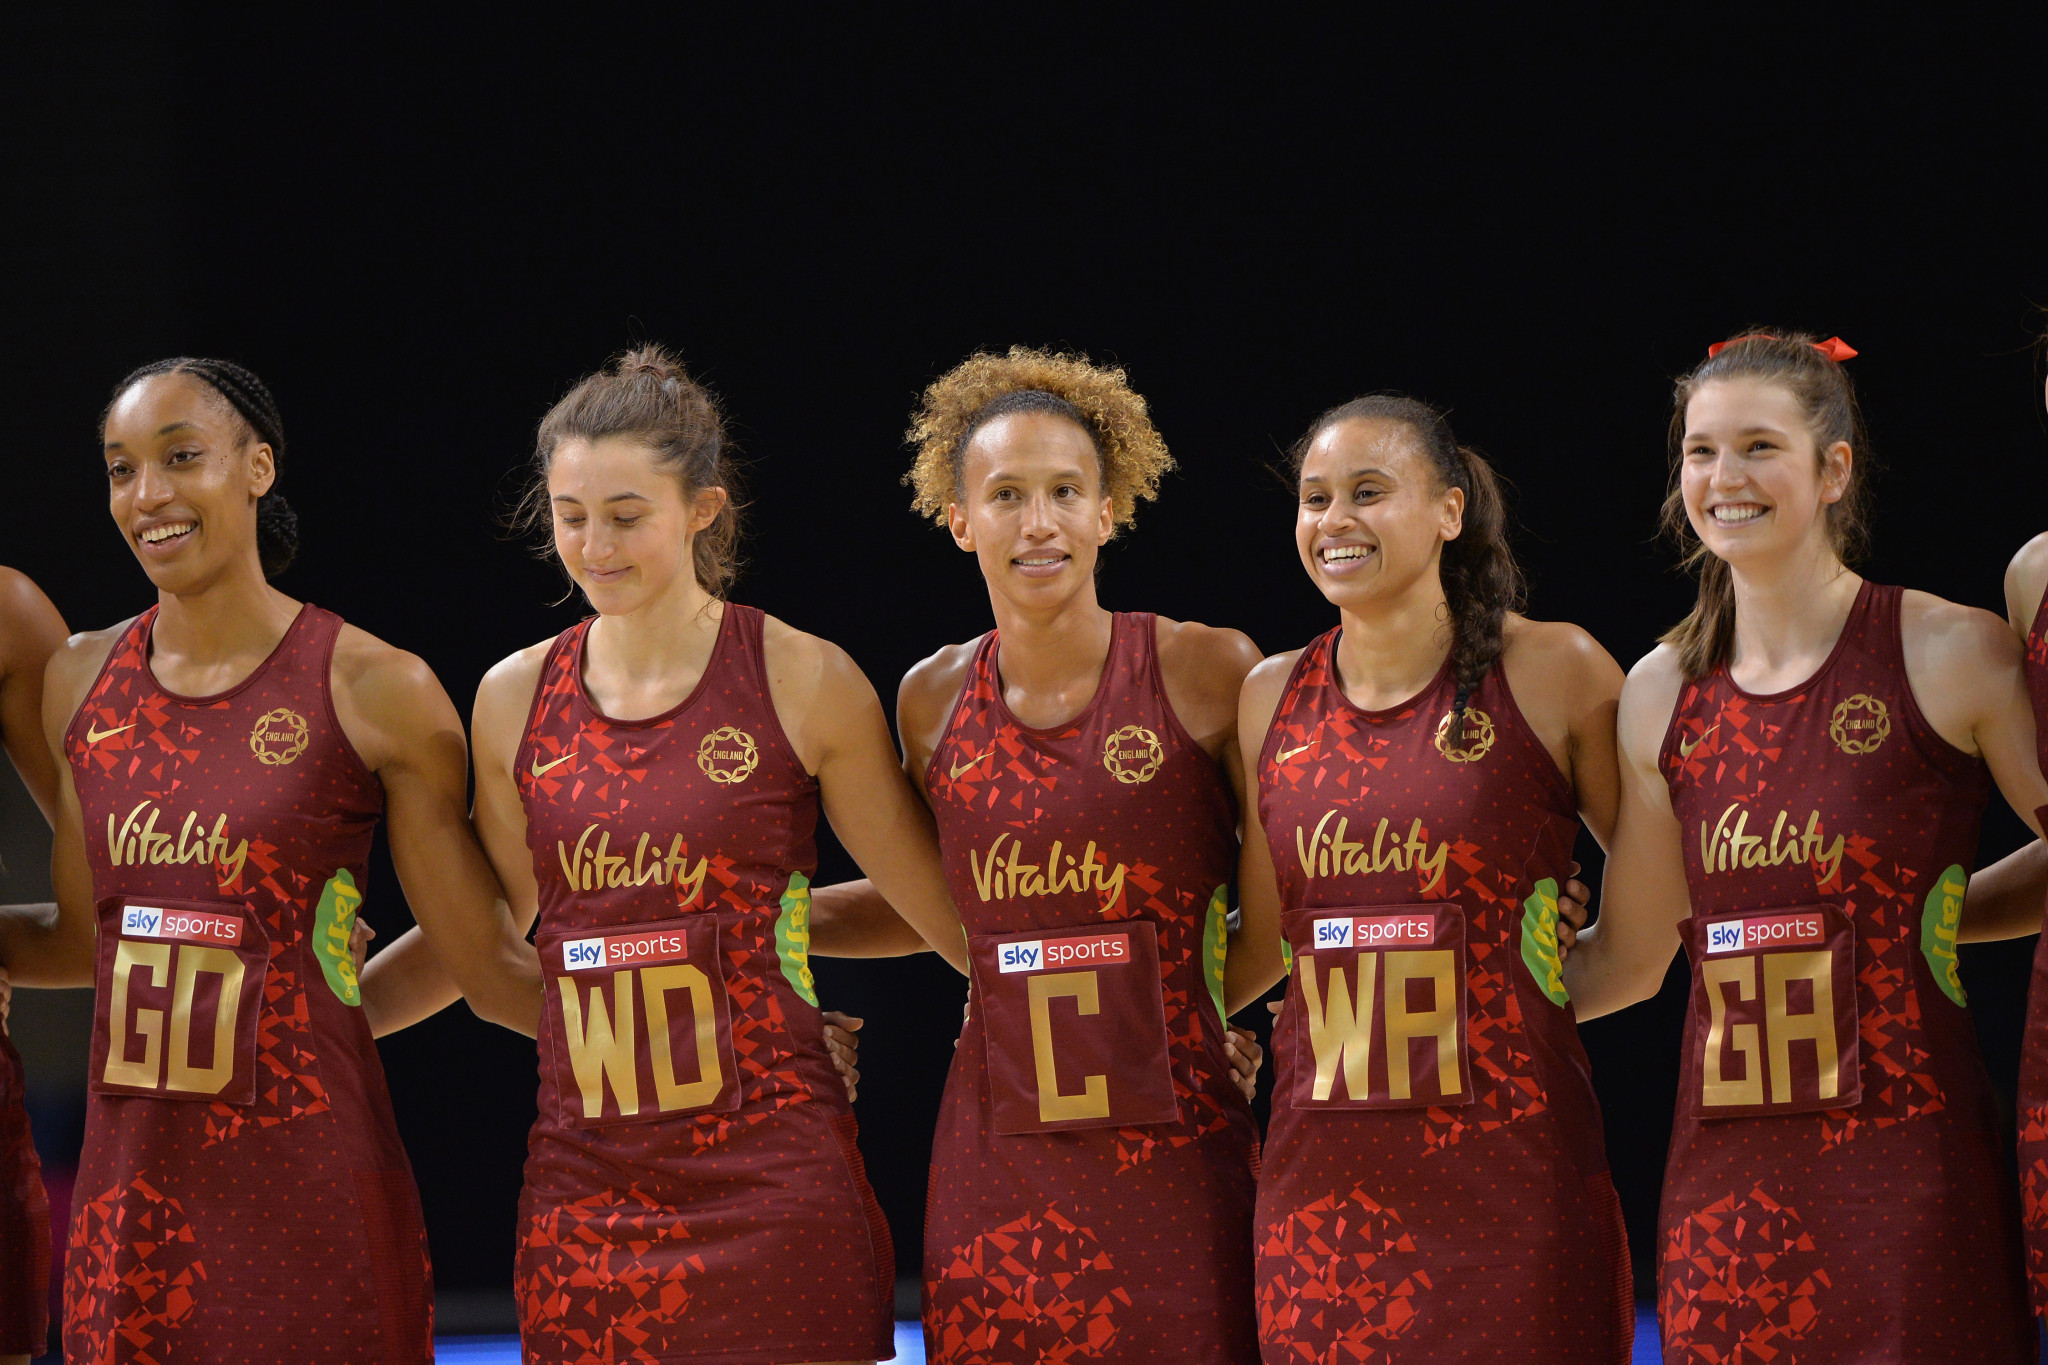 England's netball side is to play Australia, New Zealand and South Africa in January ©England Netball